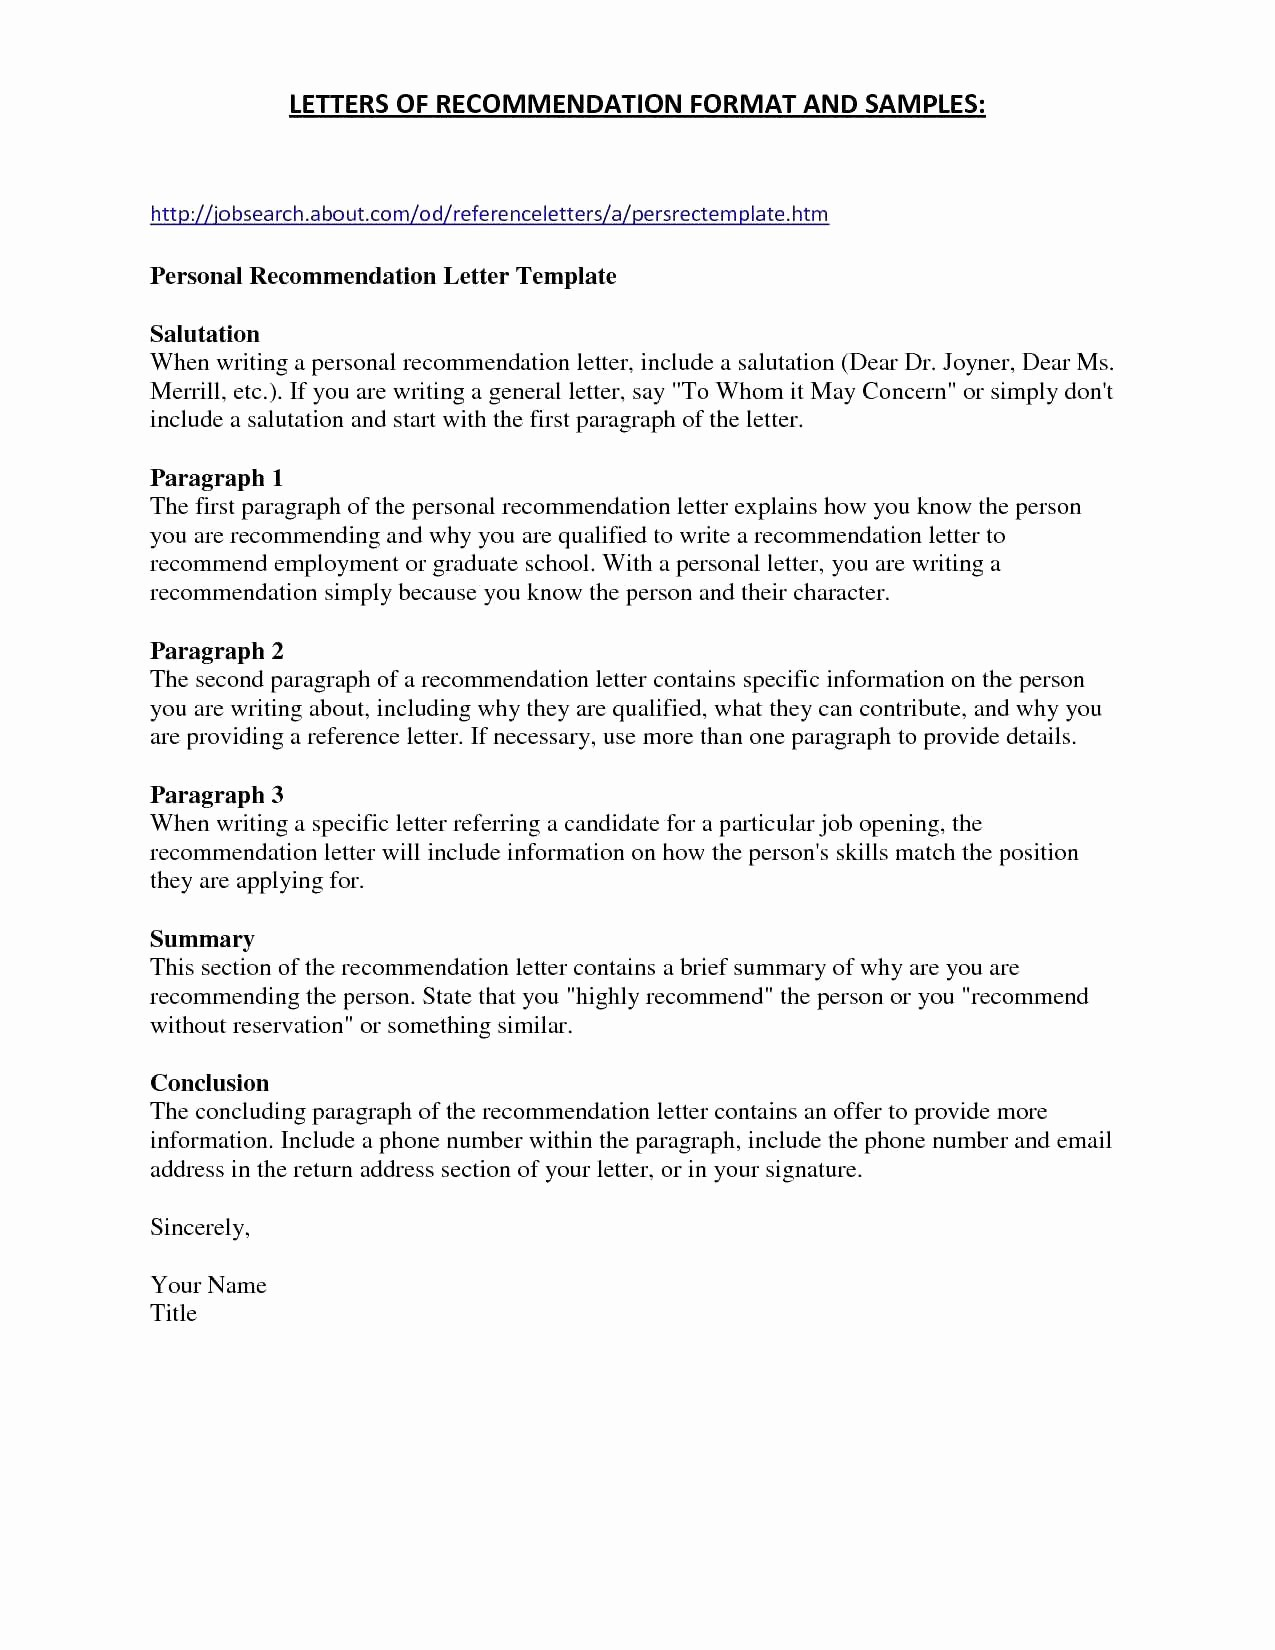 Simple Letter Of Intent Template - Letter Intent Job New Simple Letter Intent Beautiful Resume